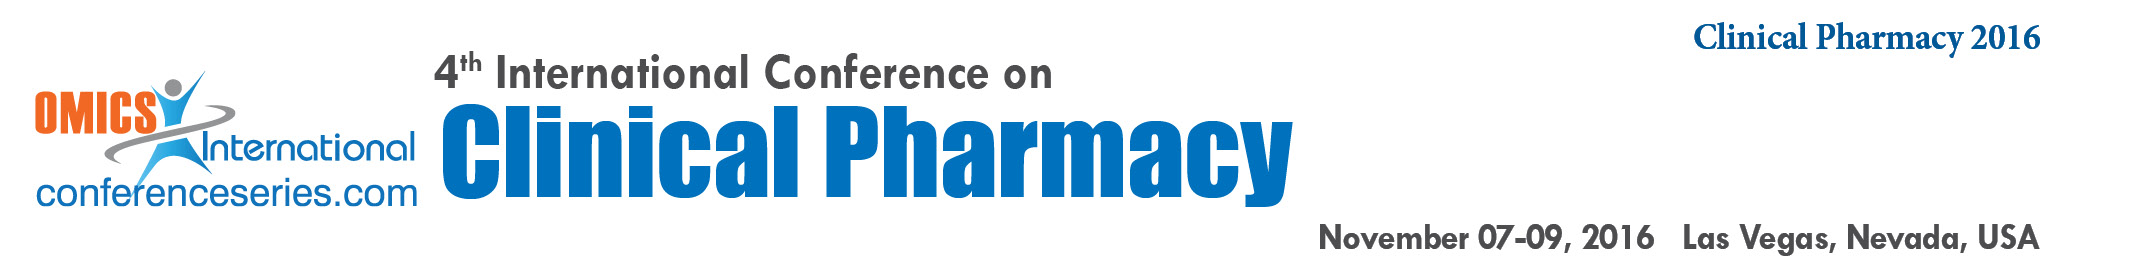 OMICS International is organizing 4th International Conference on Clinical Pharmacy during November 07-09, 2016 at Las Vegas city, USA. (Clinical Pharmacy 2016)
Clinical Pharmacy is a branch of pharmacy that deals with the patient care and medicine and promotes health, wellness and unwellness inhibition. The health professional works in management with the doctors for the patient care. Clinical pharmacists have wide education within the medicine, pharmaceutical, and clinical sciences. Clinical Pharmacy contains all the services accomplished by pharmacists active in hospitals, community pharmacies, nursing homes, home-based care services, clinics and the other setting where medicines area unit prescribed and used. 